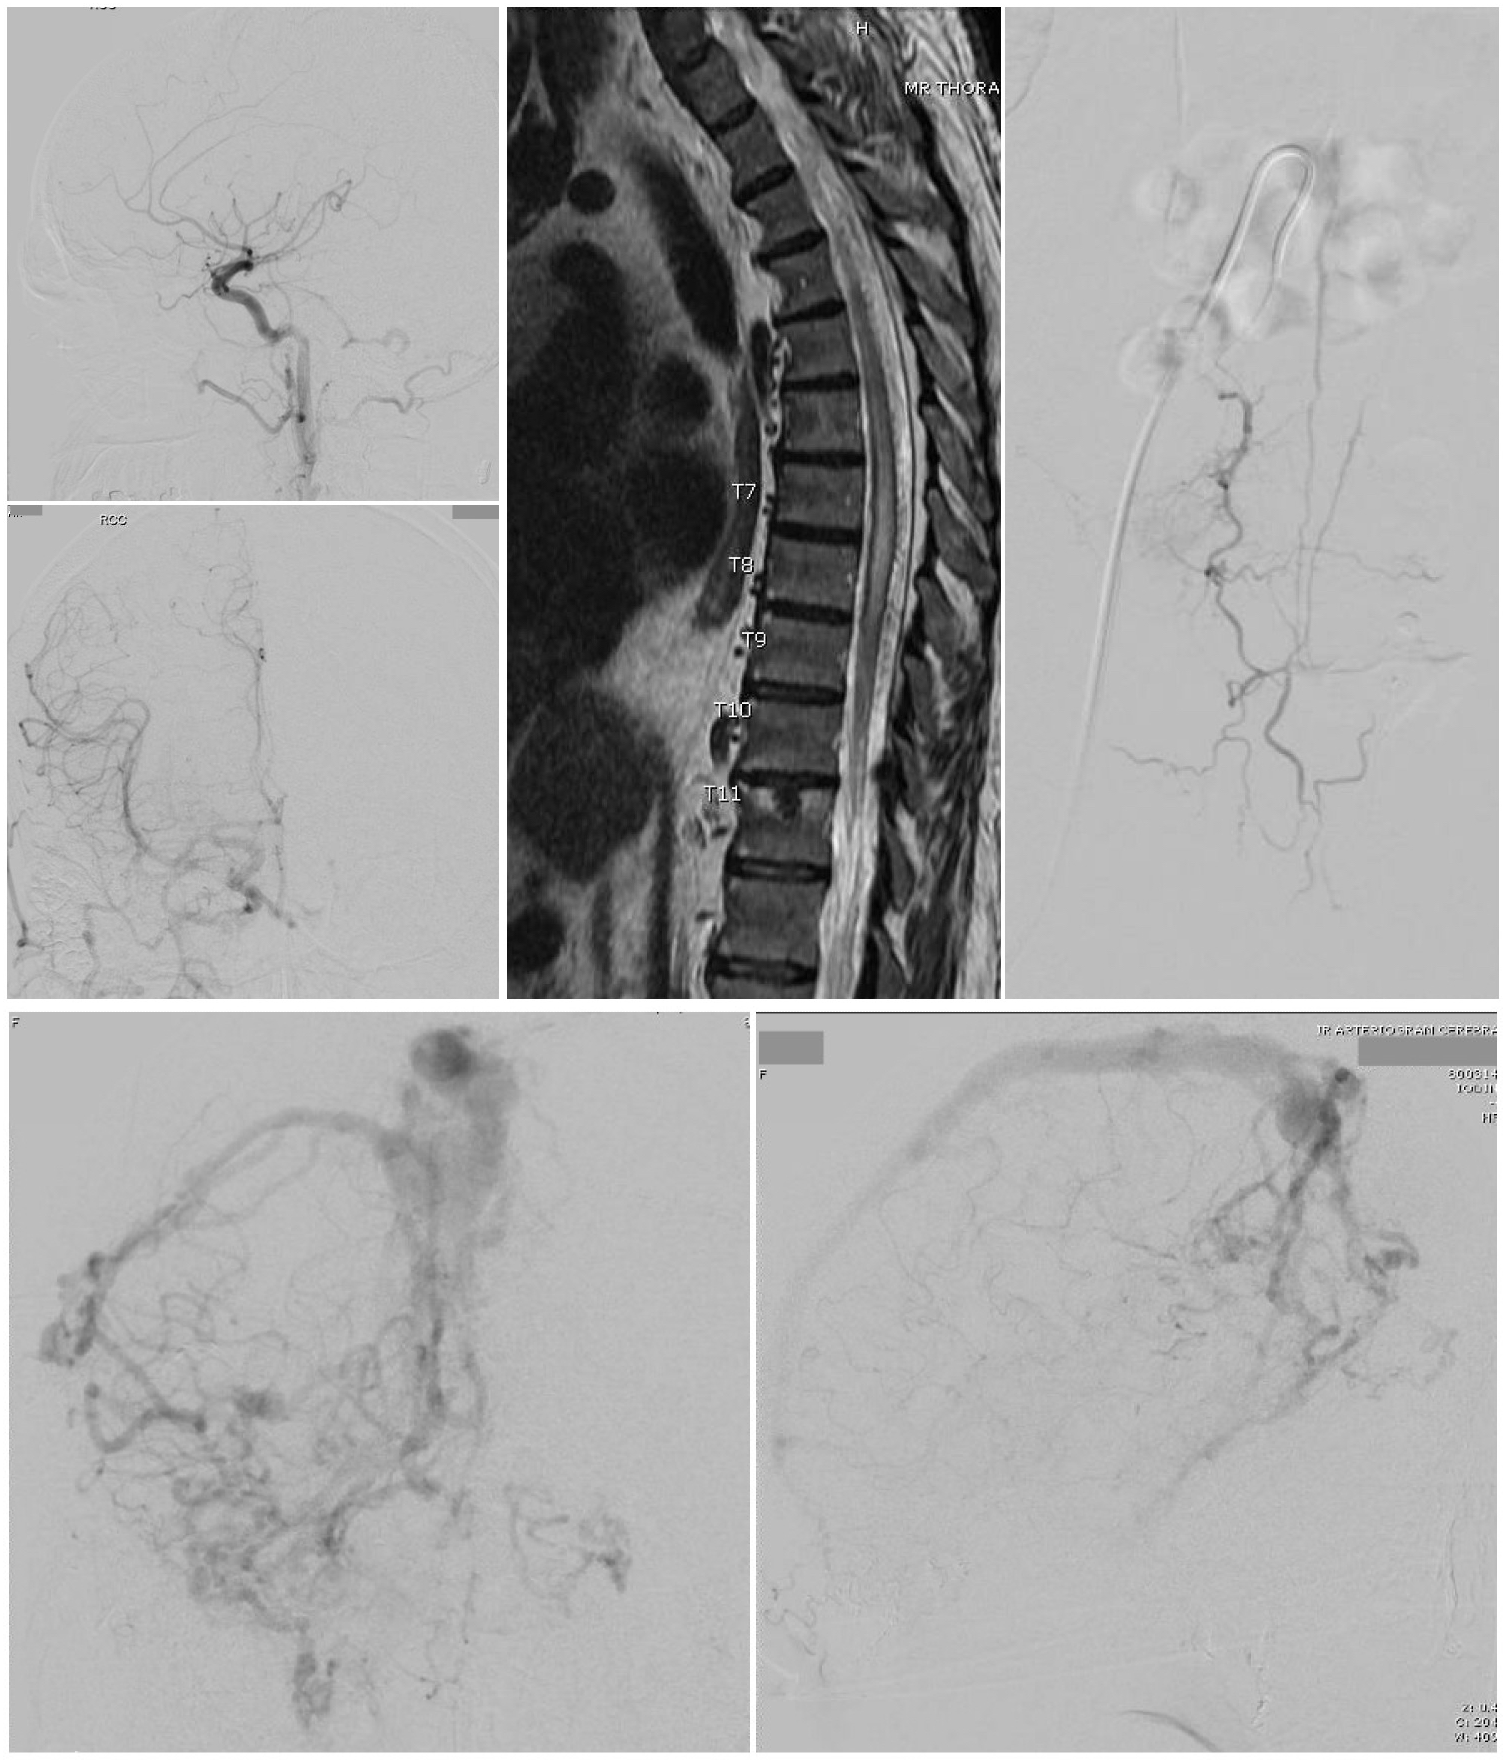 Top Left 2 images - A Cognard type 3 dural arteriovenous fistula is seen on cerebral catheter angiography with arterial phase right common carotid injections, lateral view (top) and anteroposterior view (bottom)